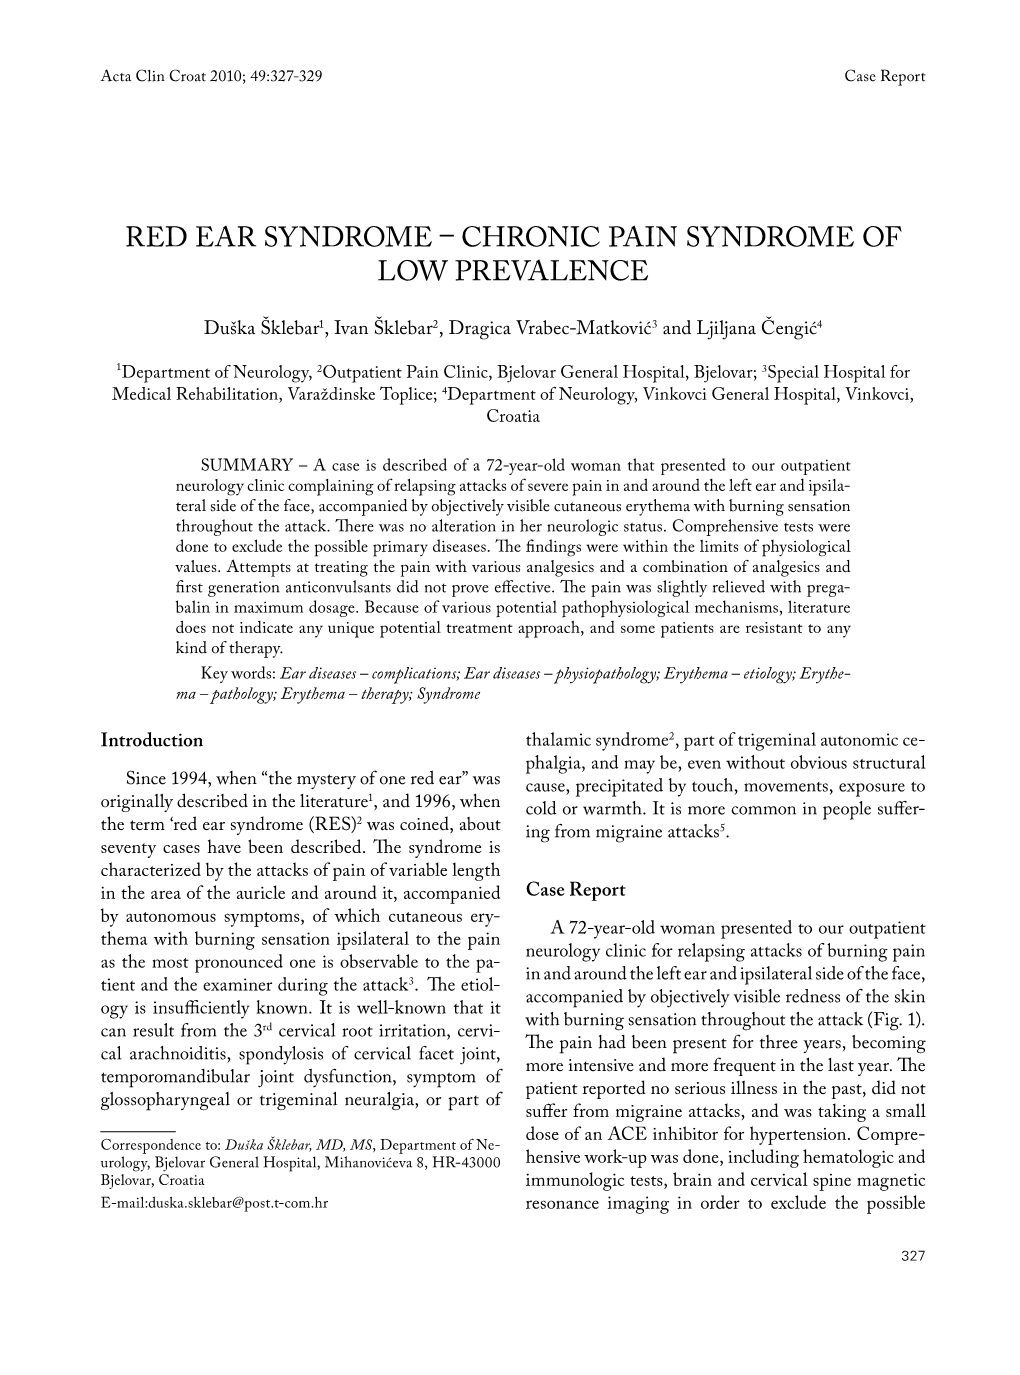 Red Ear Syndrome – Chronic Pain Syndrome of Low Prevalence